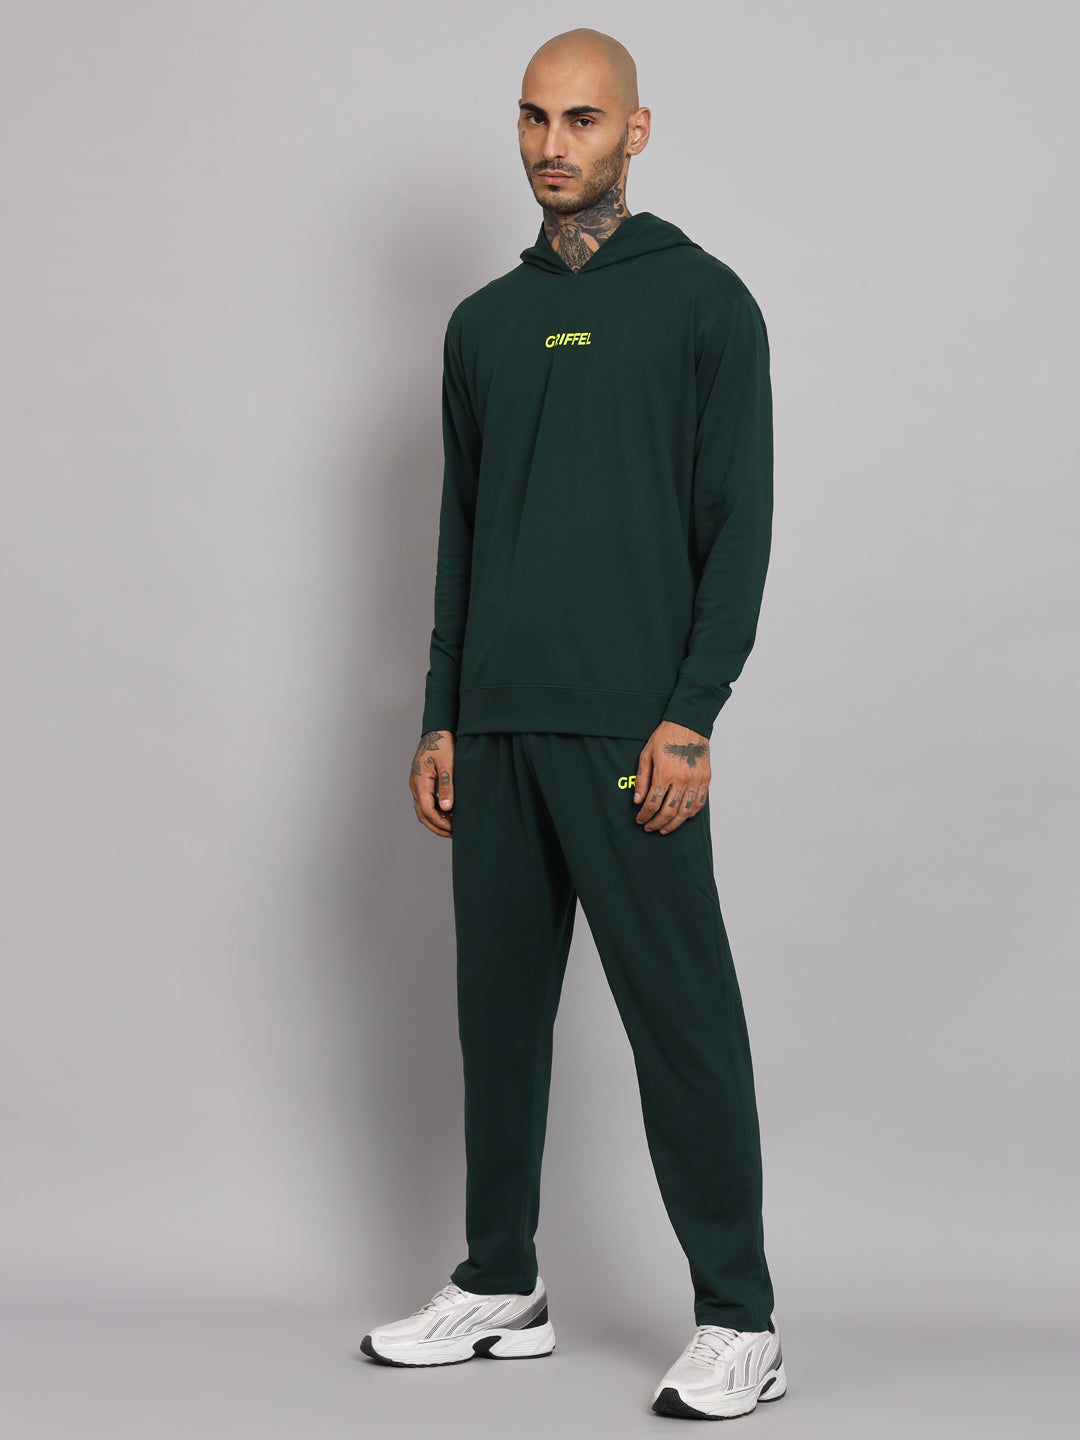 Griffel Men's Pre Winter Front Logo Solid Cotton Basic Hoodie and Joggers Full set Green Tracksuit - griffel